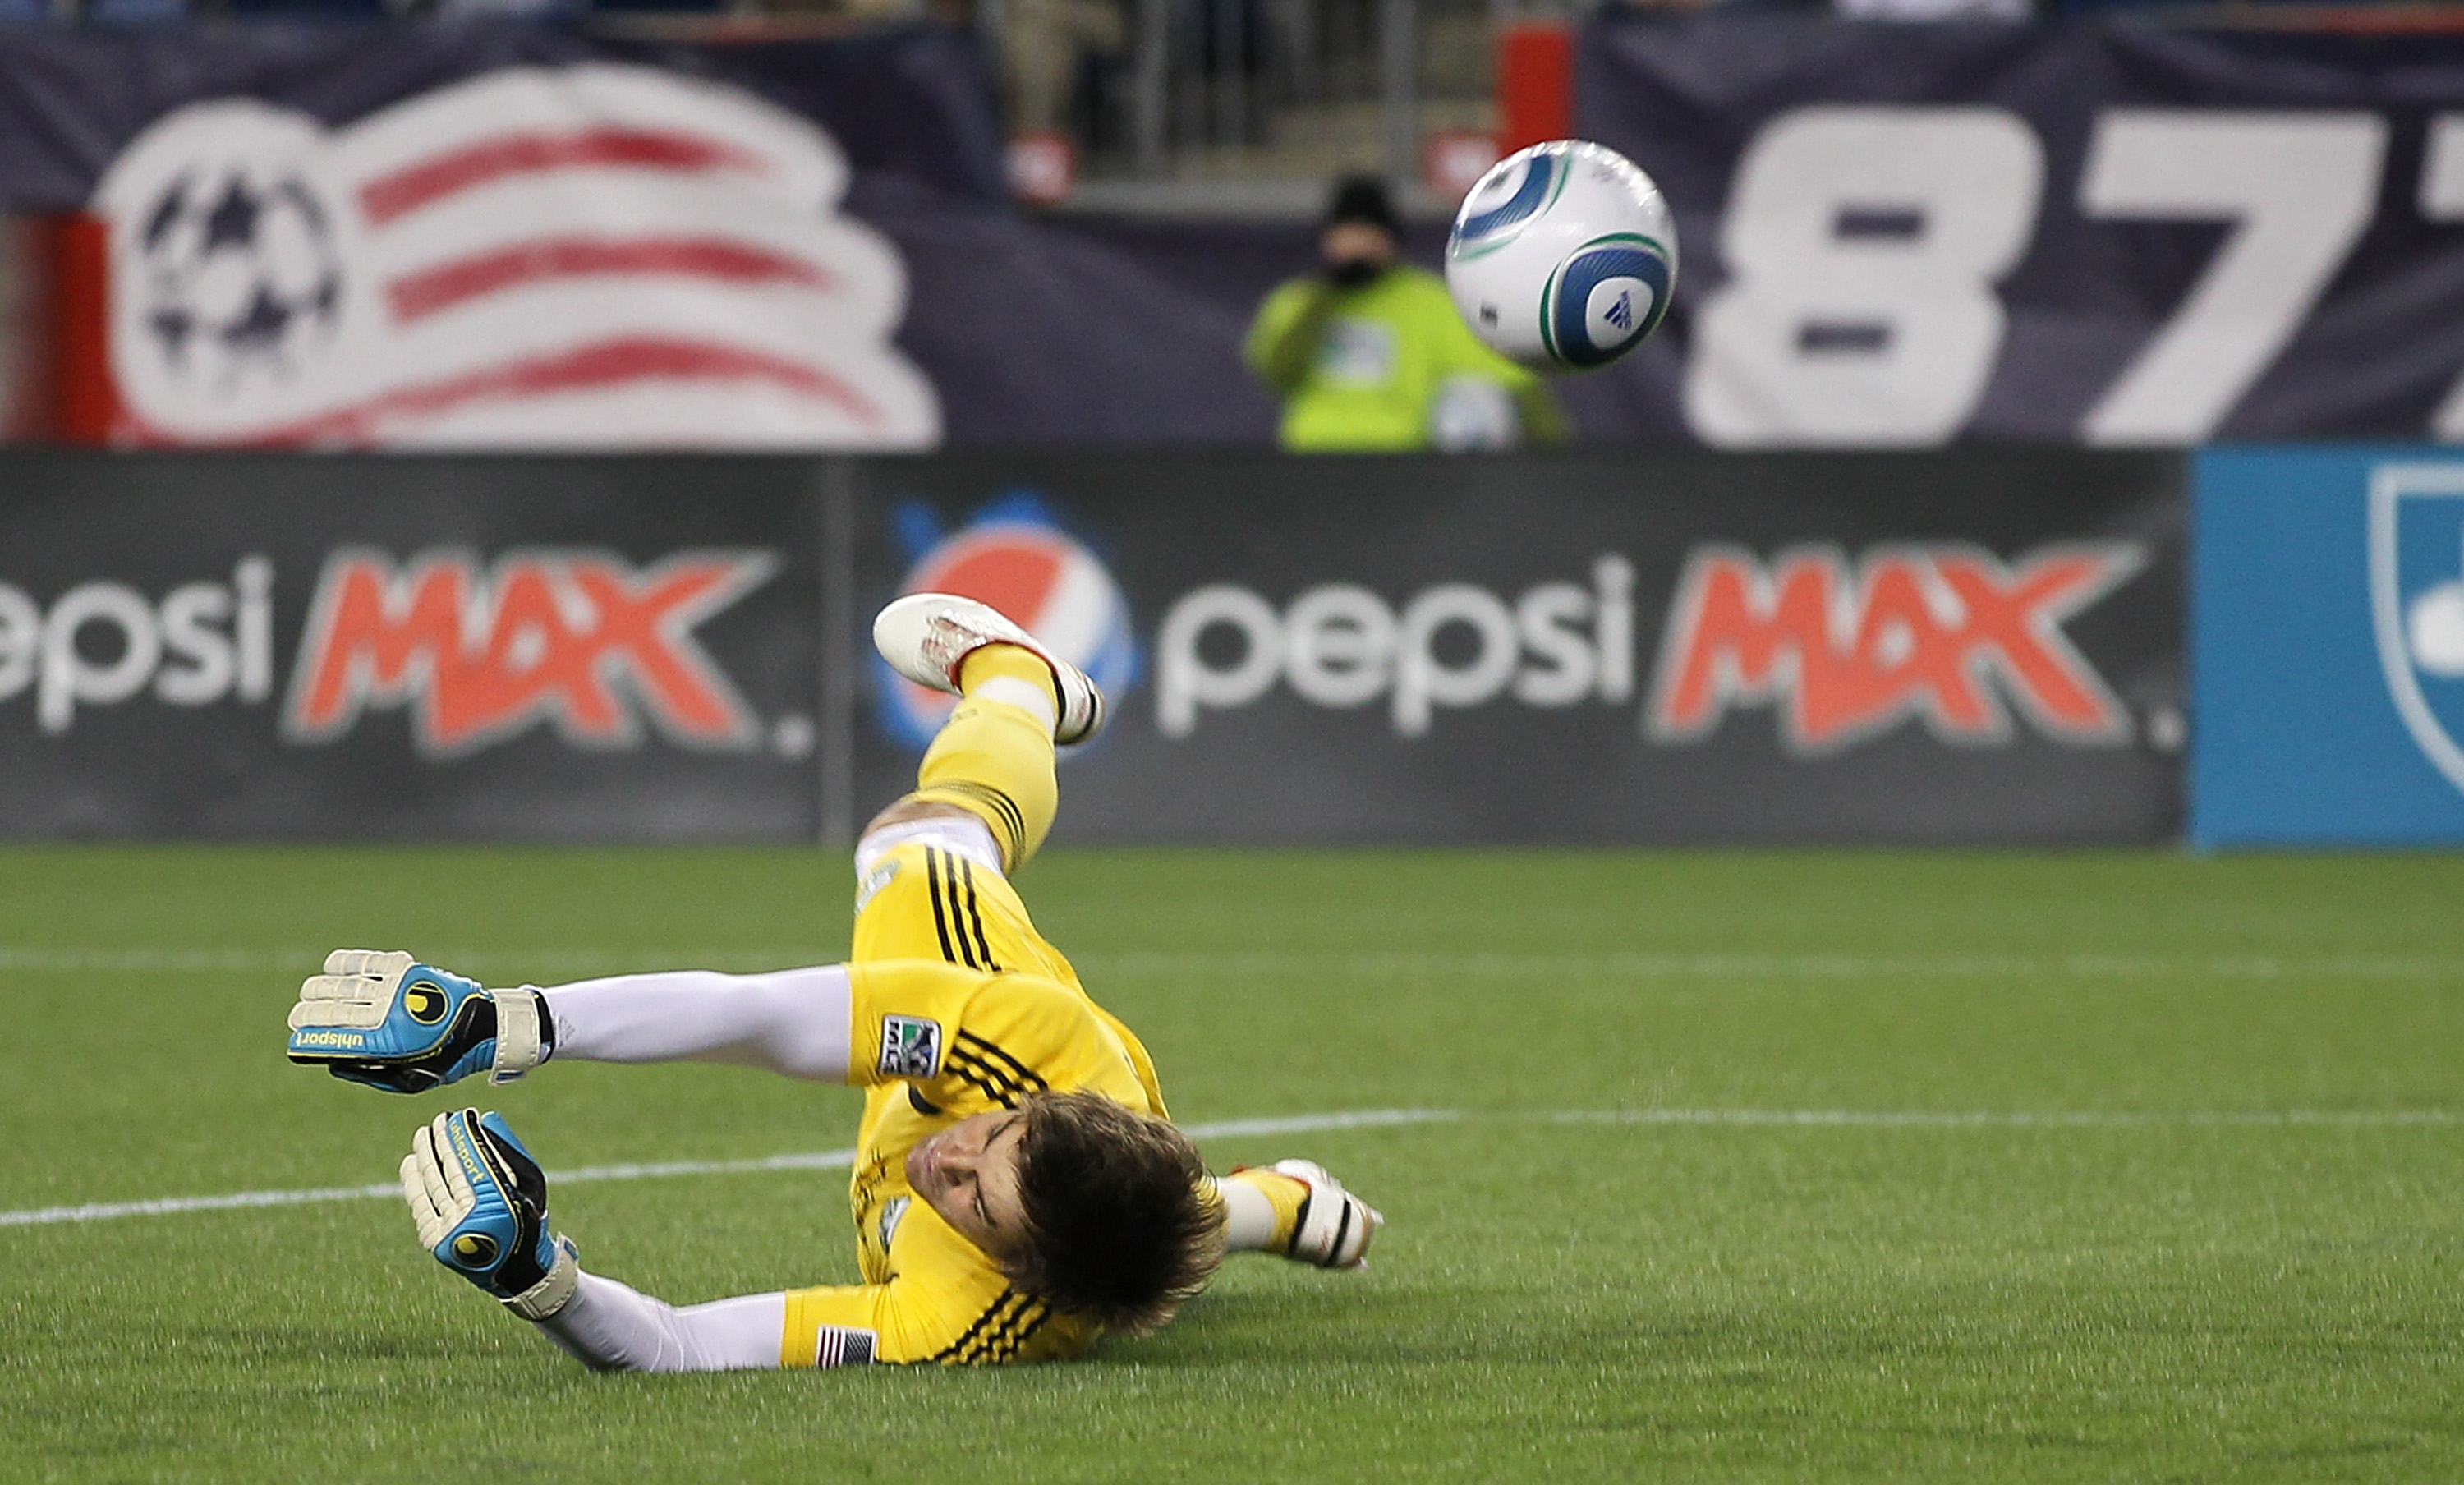 FOXBORO, MA - APRIL 2:  Jake Gleeson #20 of the Portland Timbers is unable to stop a goal by the New England Revolution score against the Timbers at Gillette Stadium on April 2, 2011 in Foxboro, Massachusetts. (Photo by Jim Rogash/Getty Images)